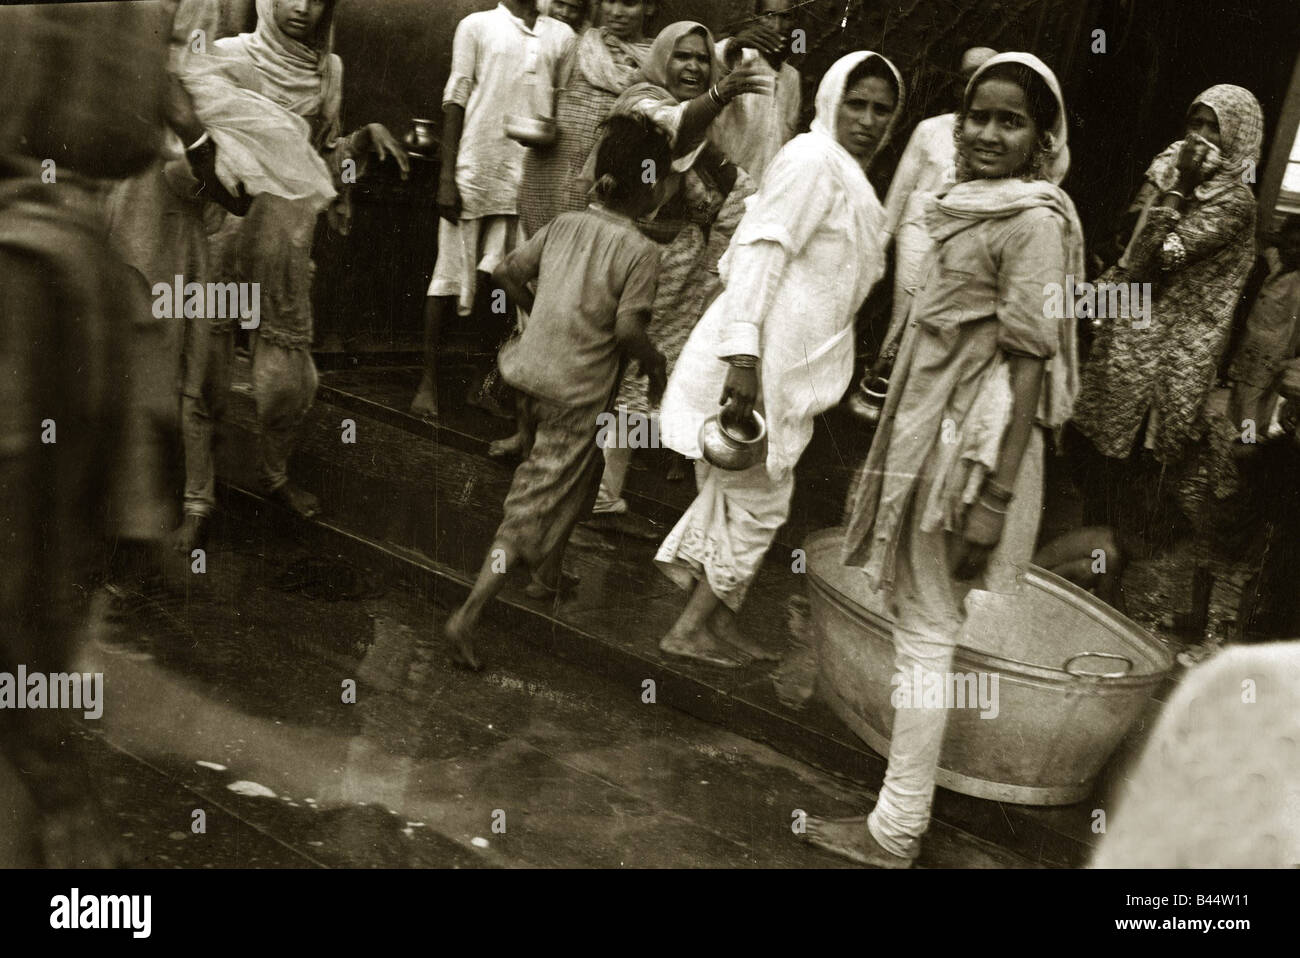 A street scene in India Women going about doing their daily tasks wearing traditional clothing Circa 1970 Stock Photo